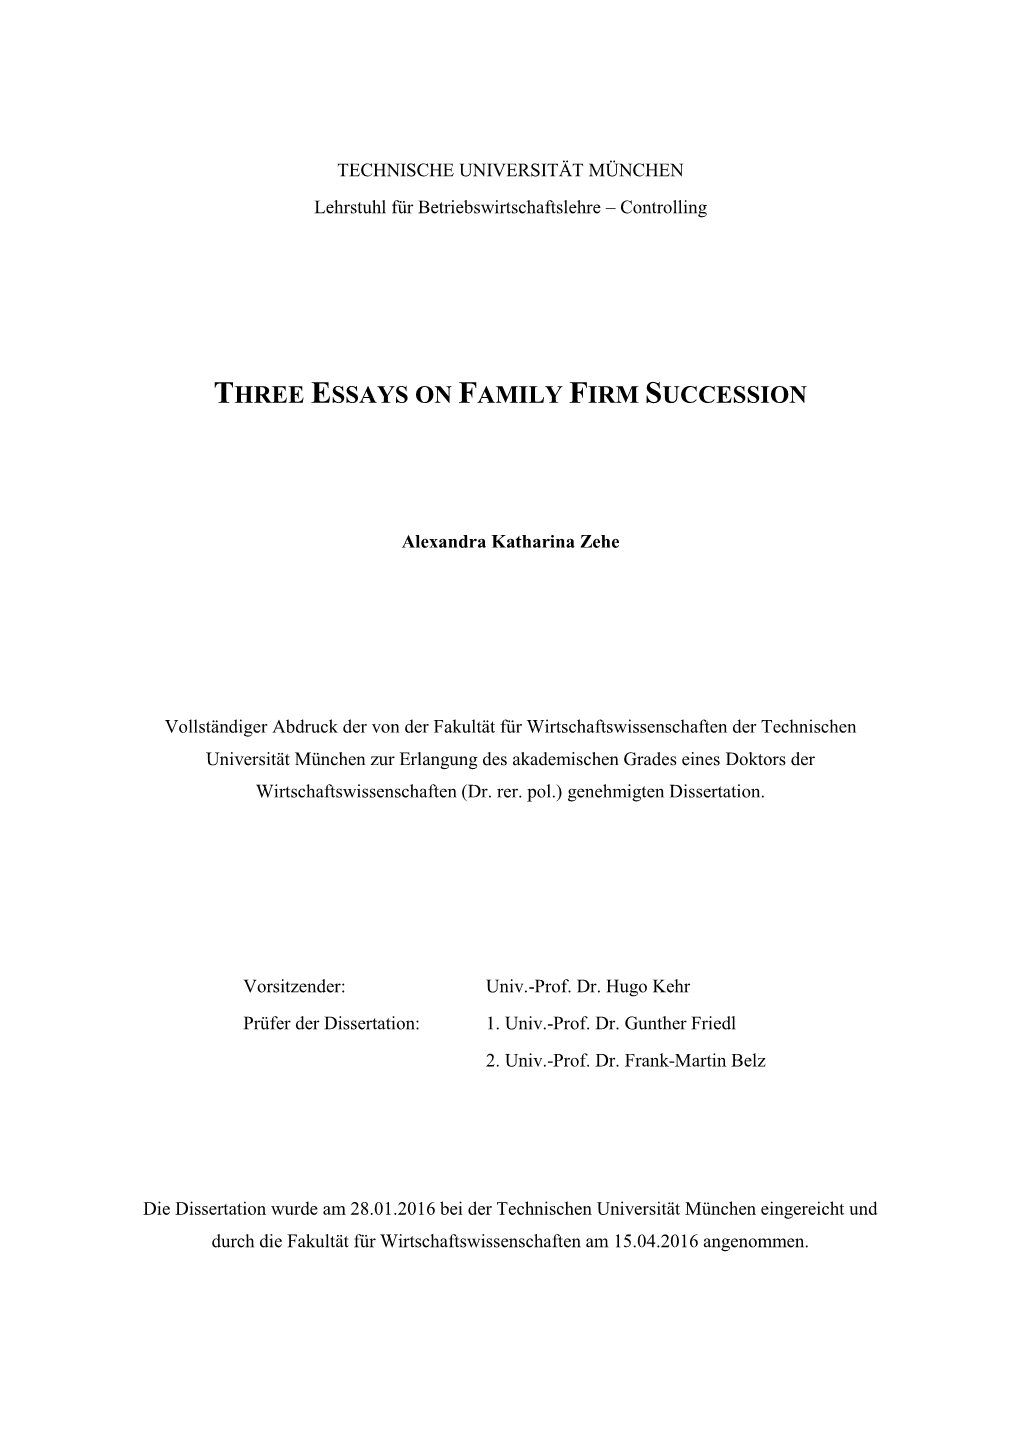 Three Essays on Family Firm Succession